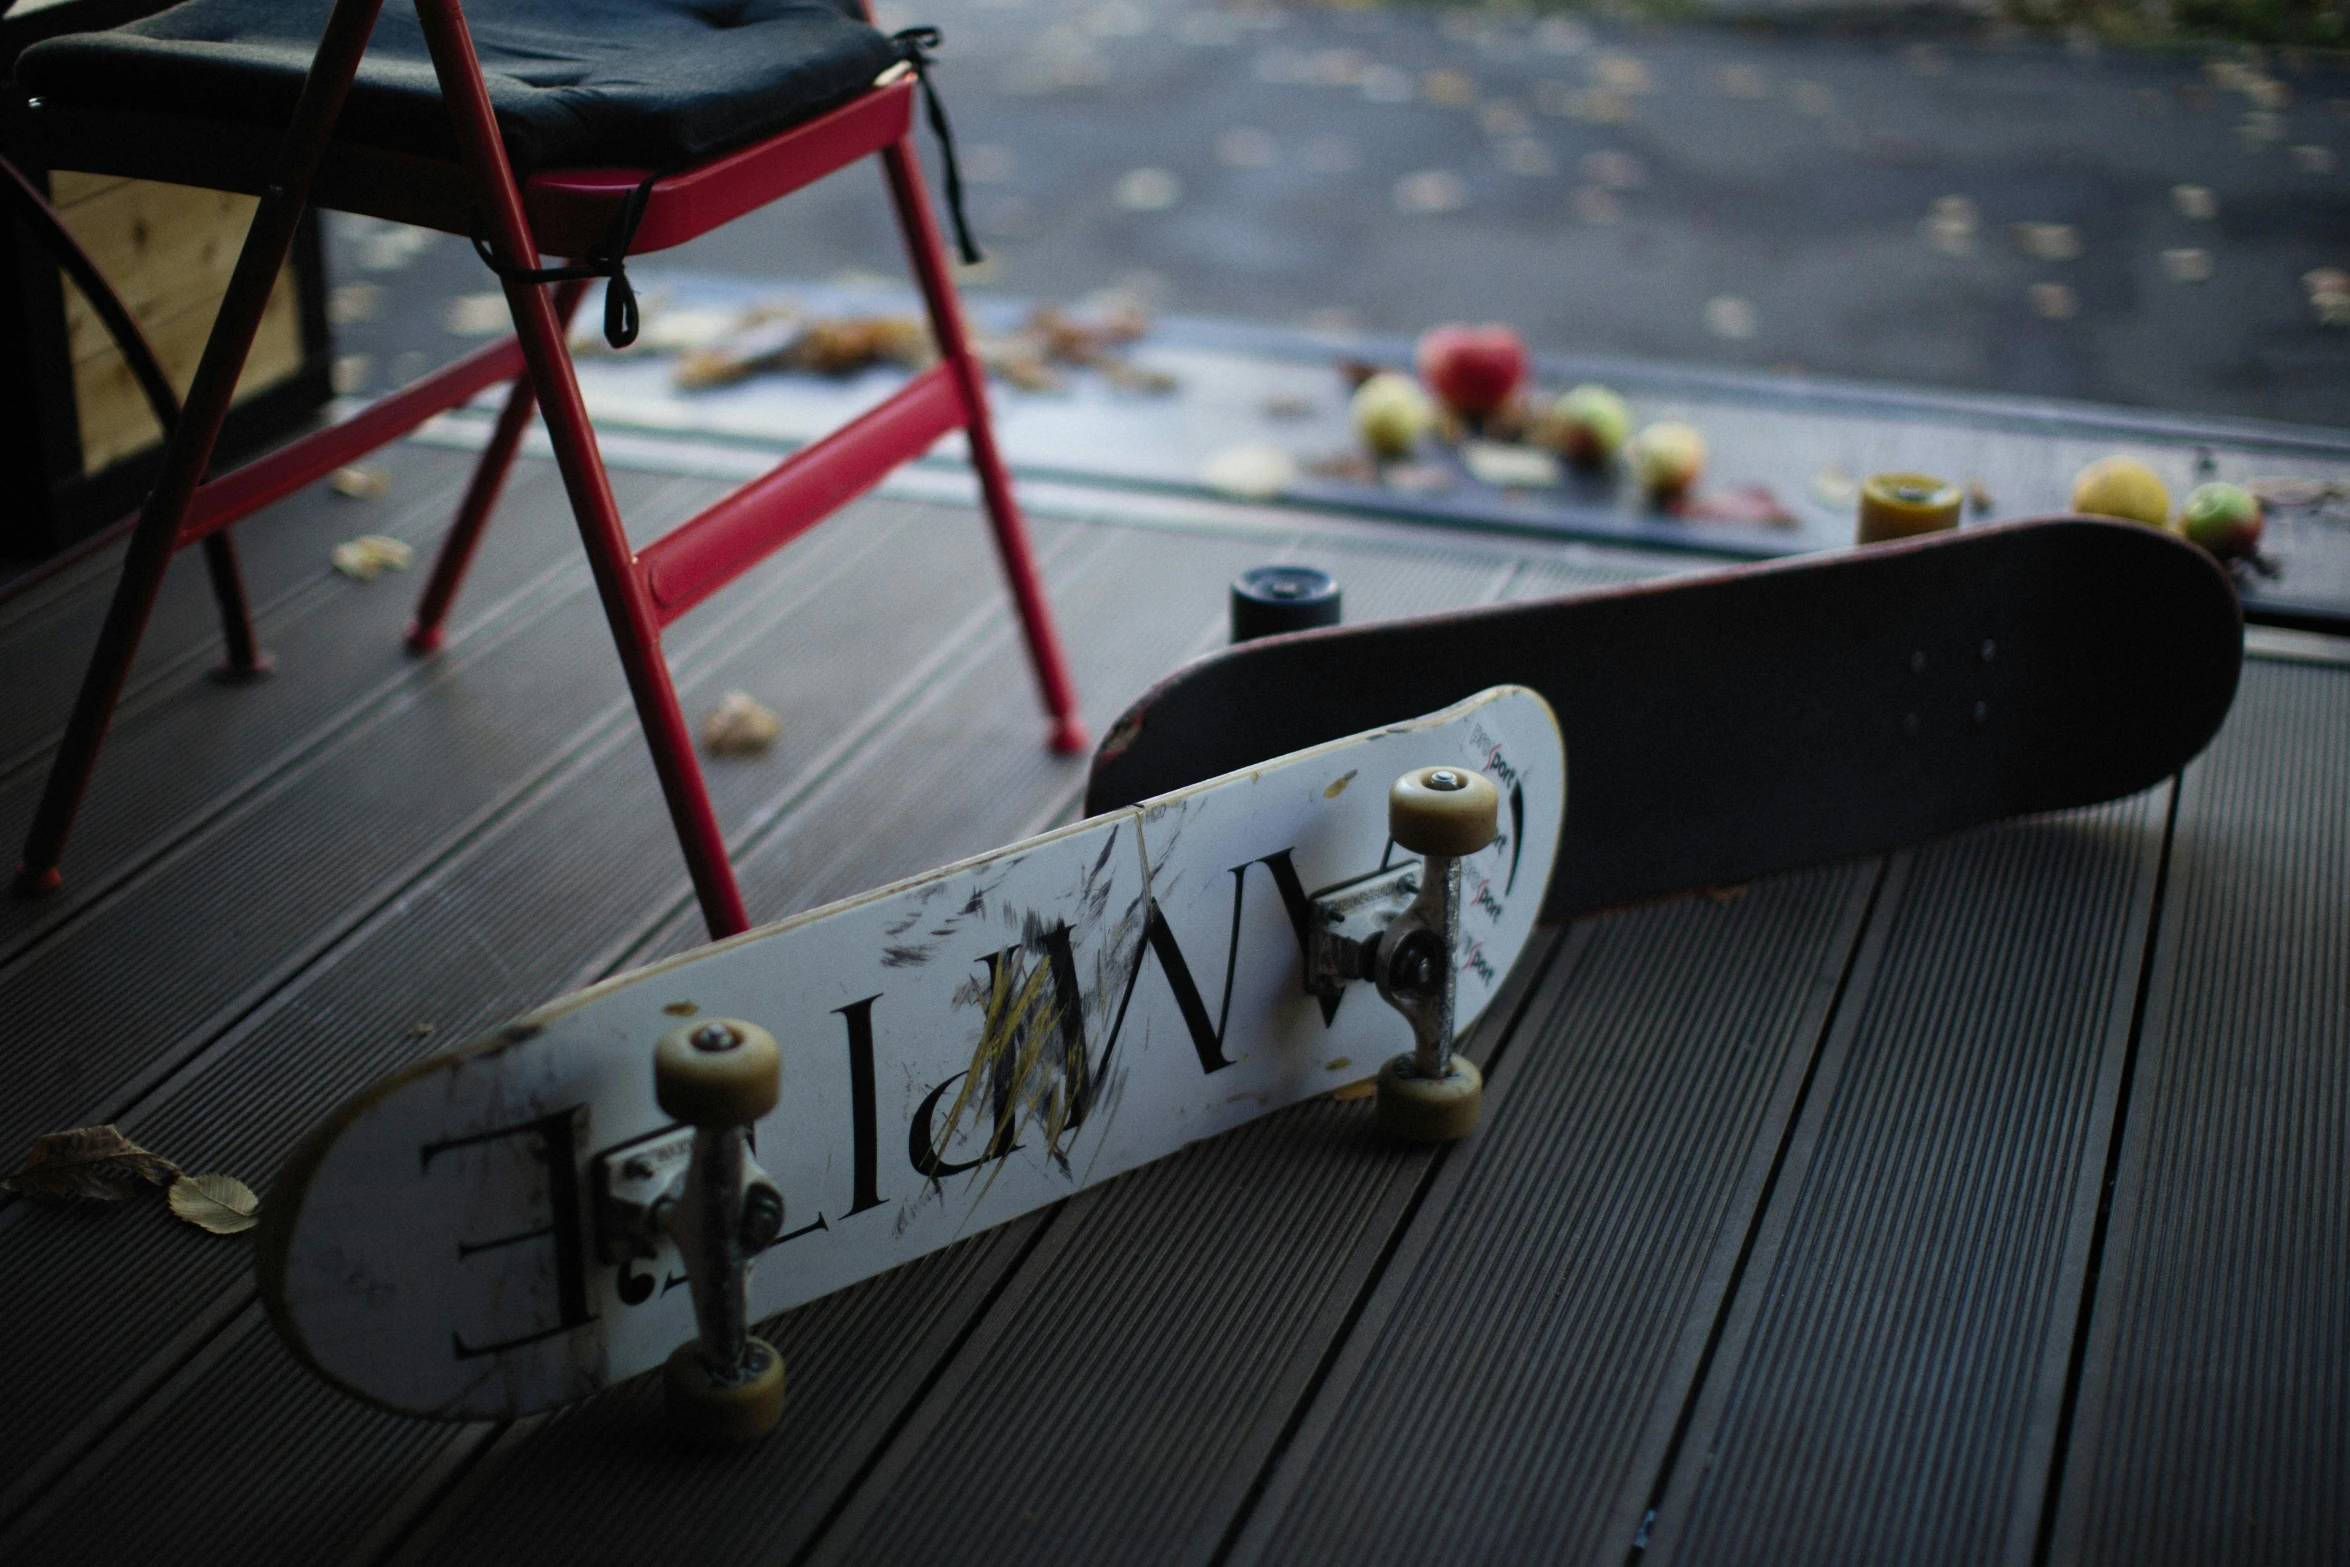 two skateboards that are on a porch